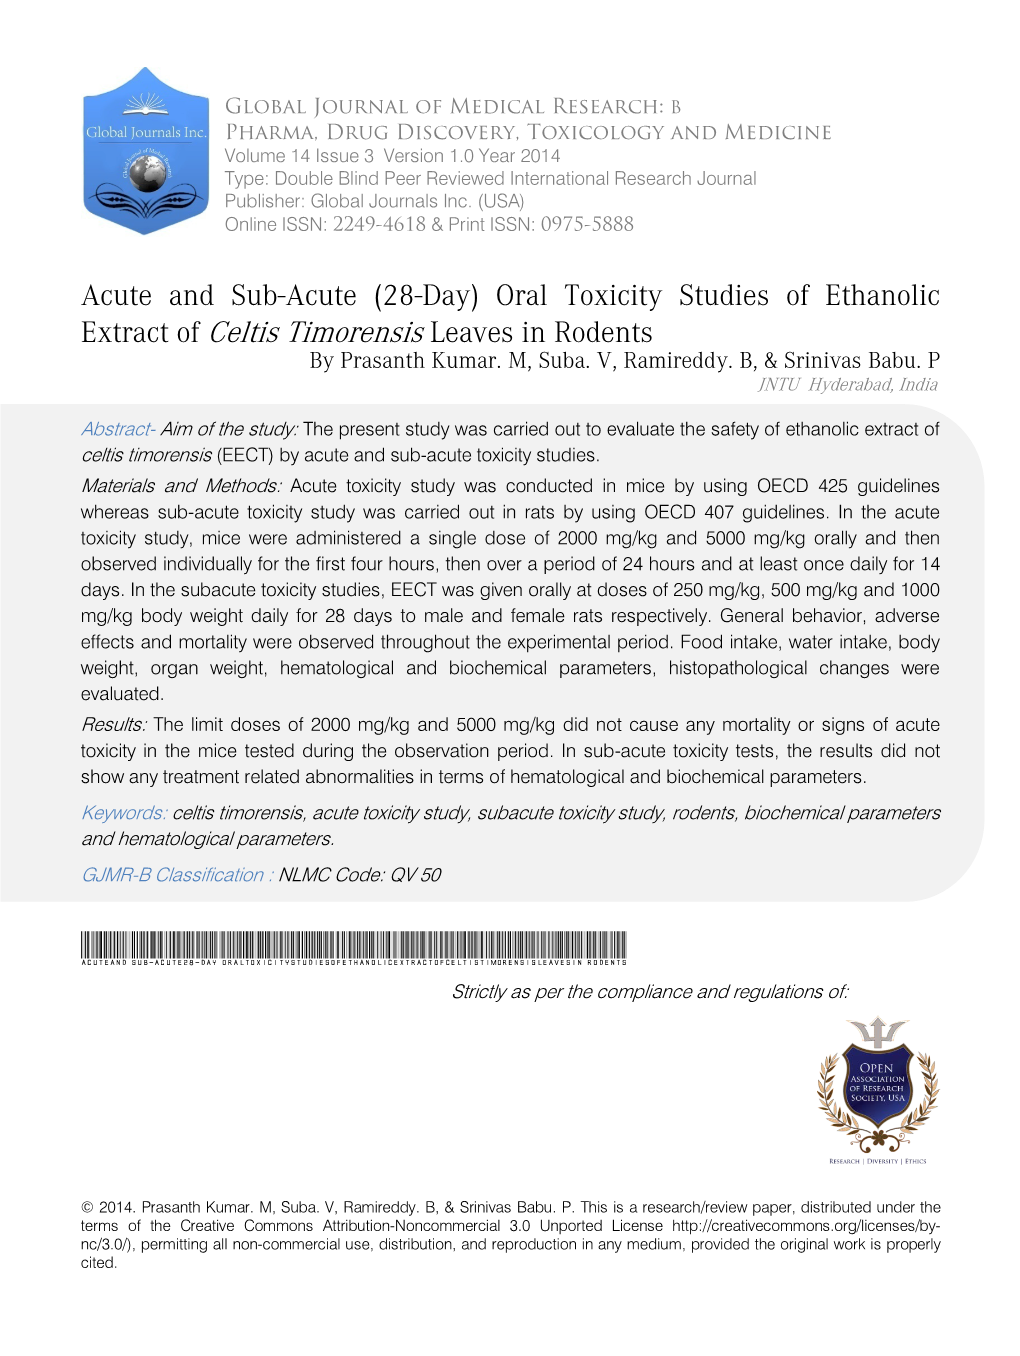 Acute and Sub-Acute (28-Day) Oral Toxicity Studies of Ethanolic Extract of Celtis Timorensis Leaves in Rodents by Prasanth Kumar